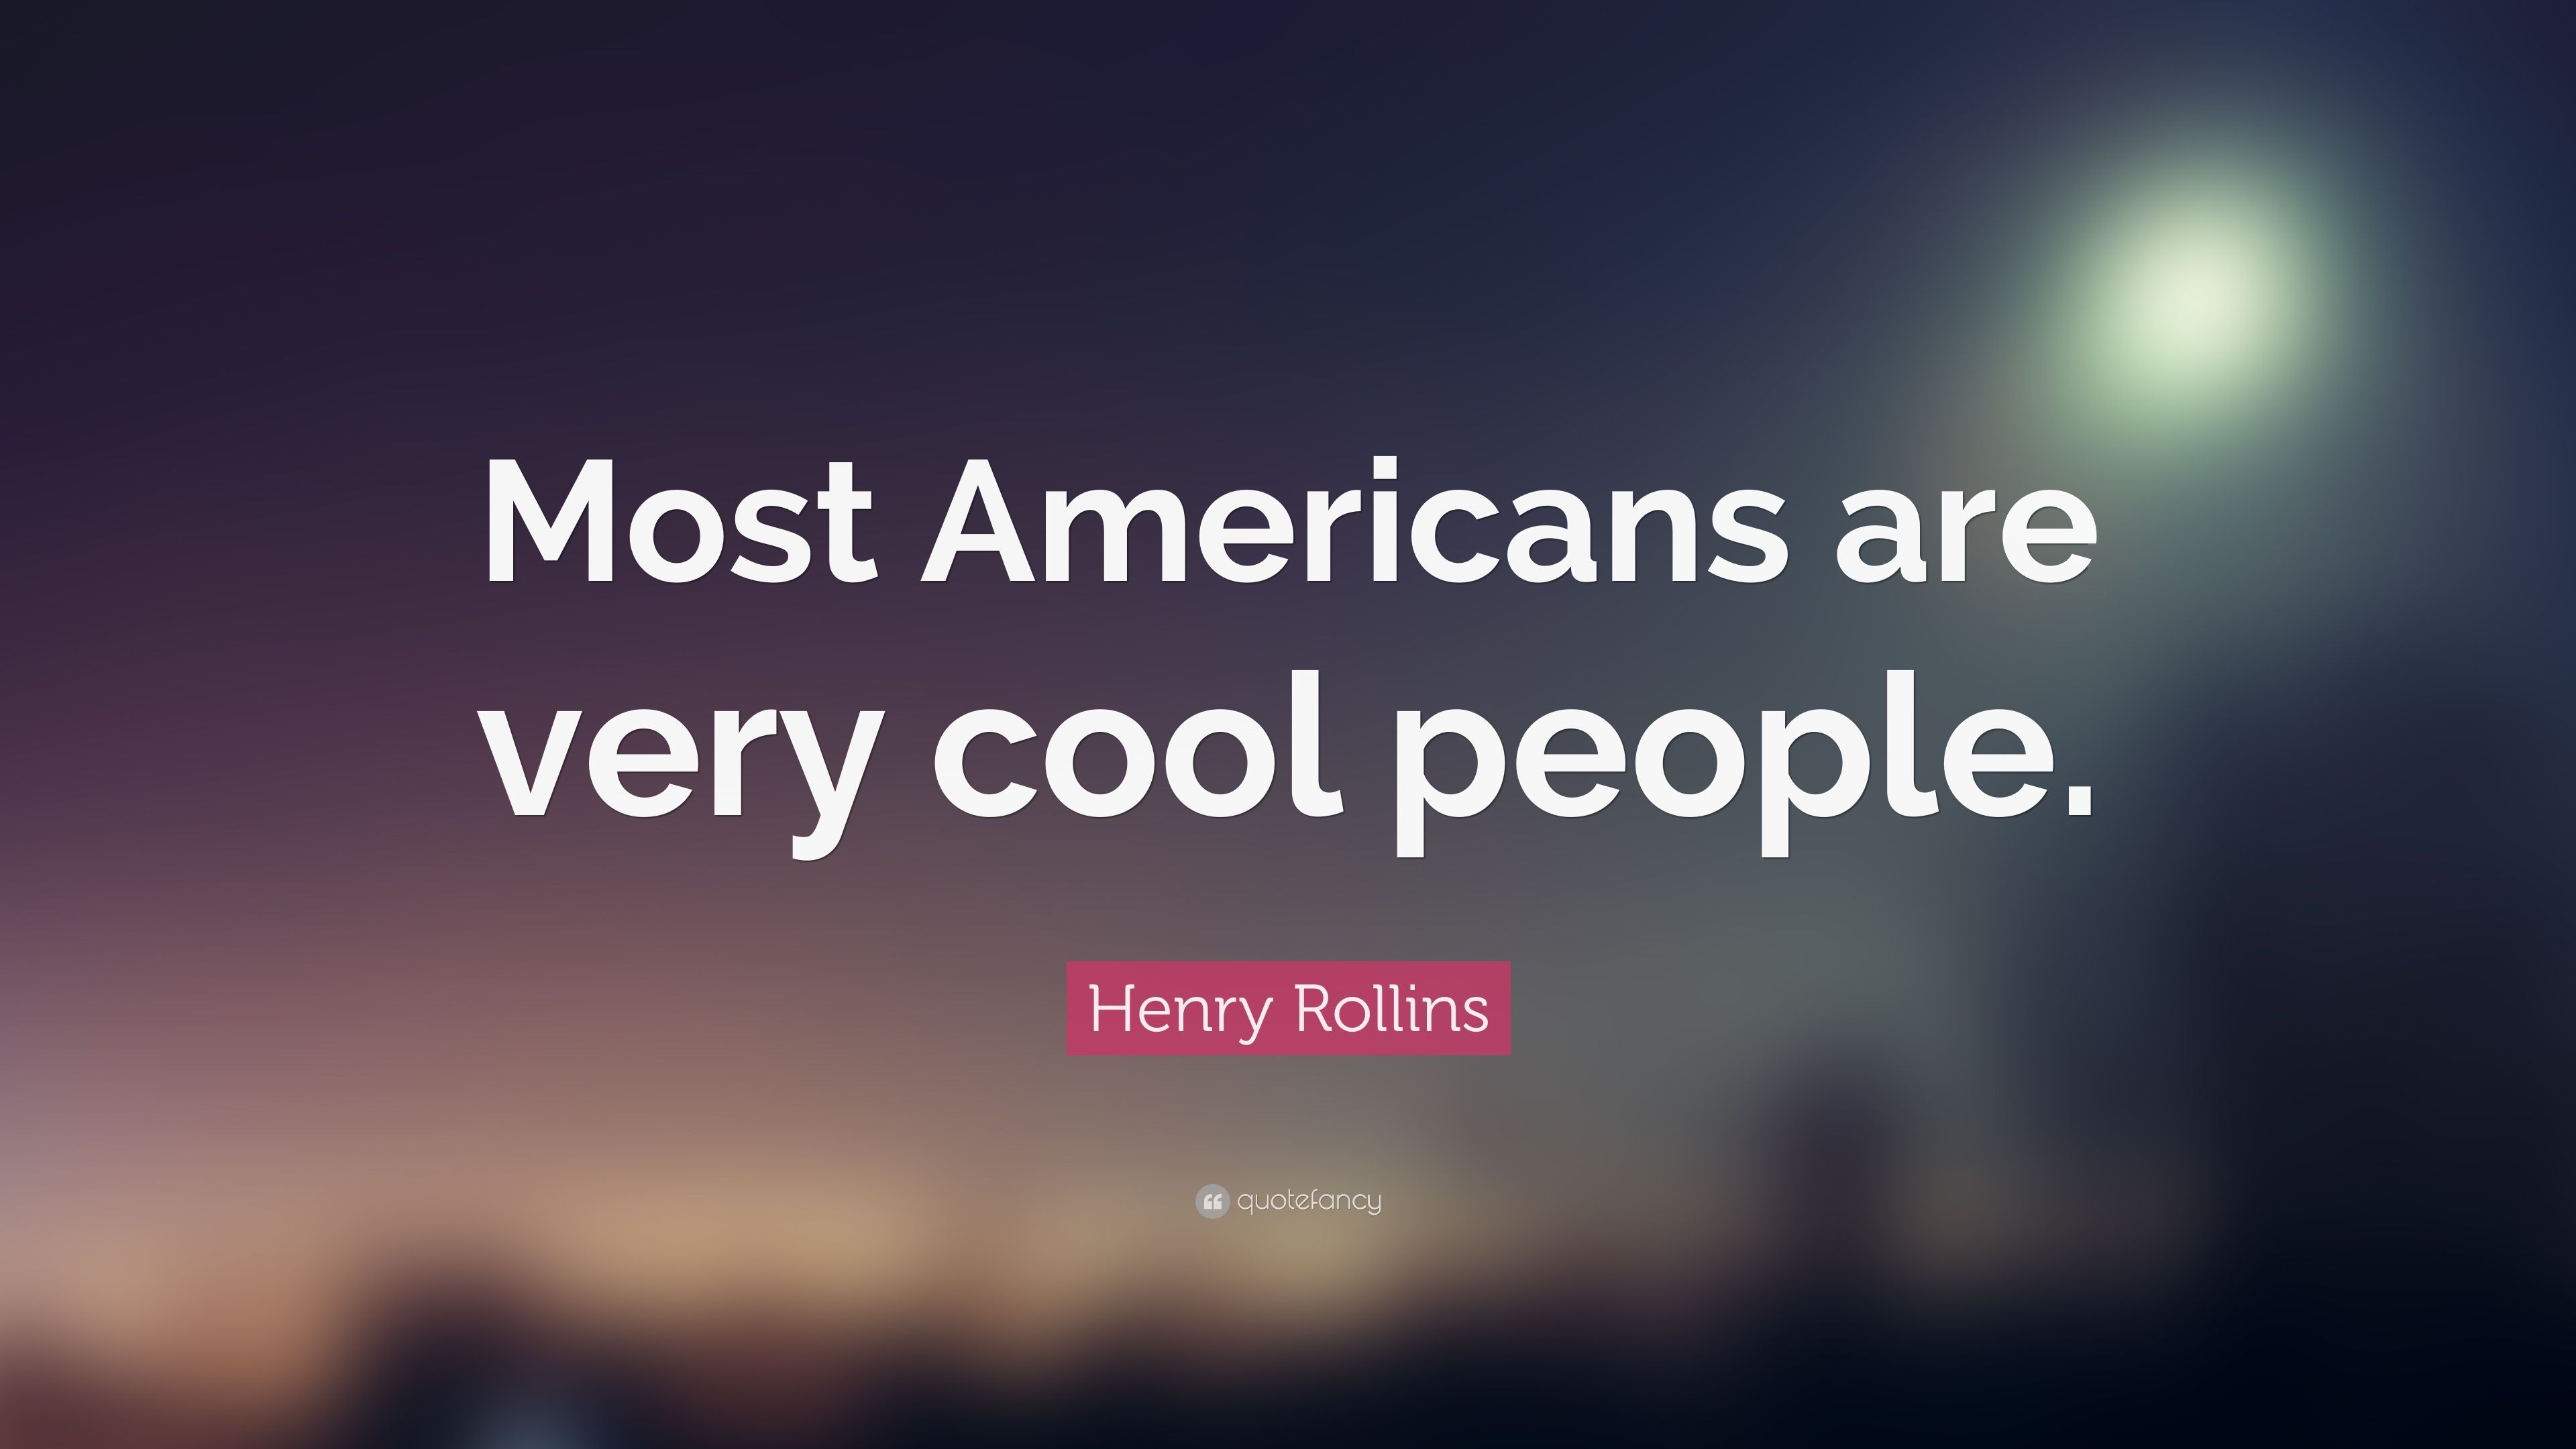 Henry Rollins Quote: “Most Americans are very cool people.” 7